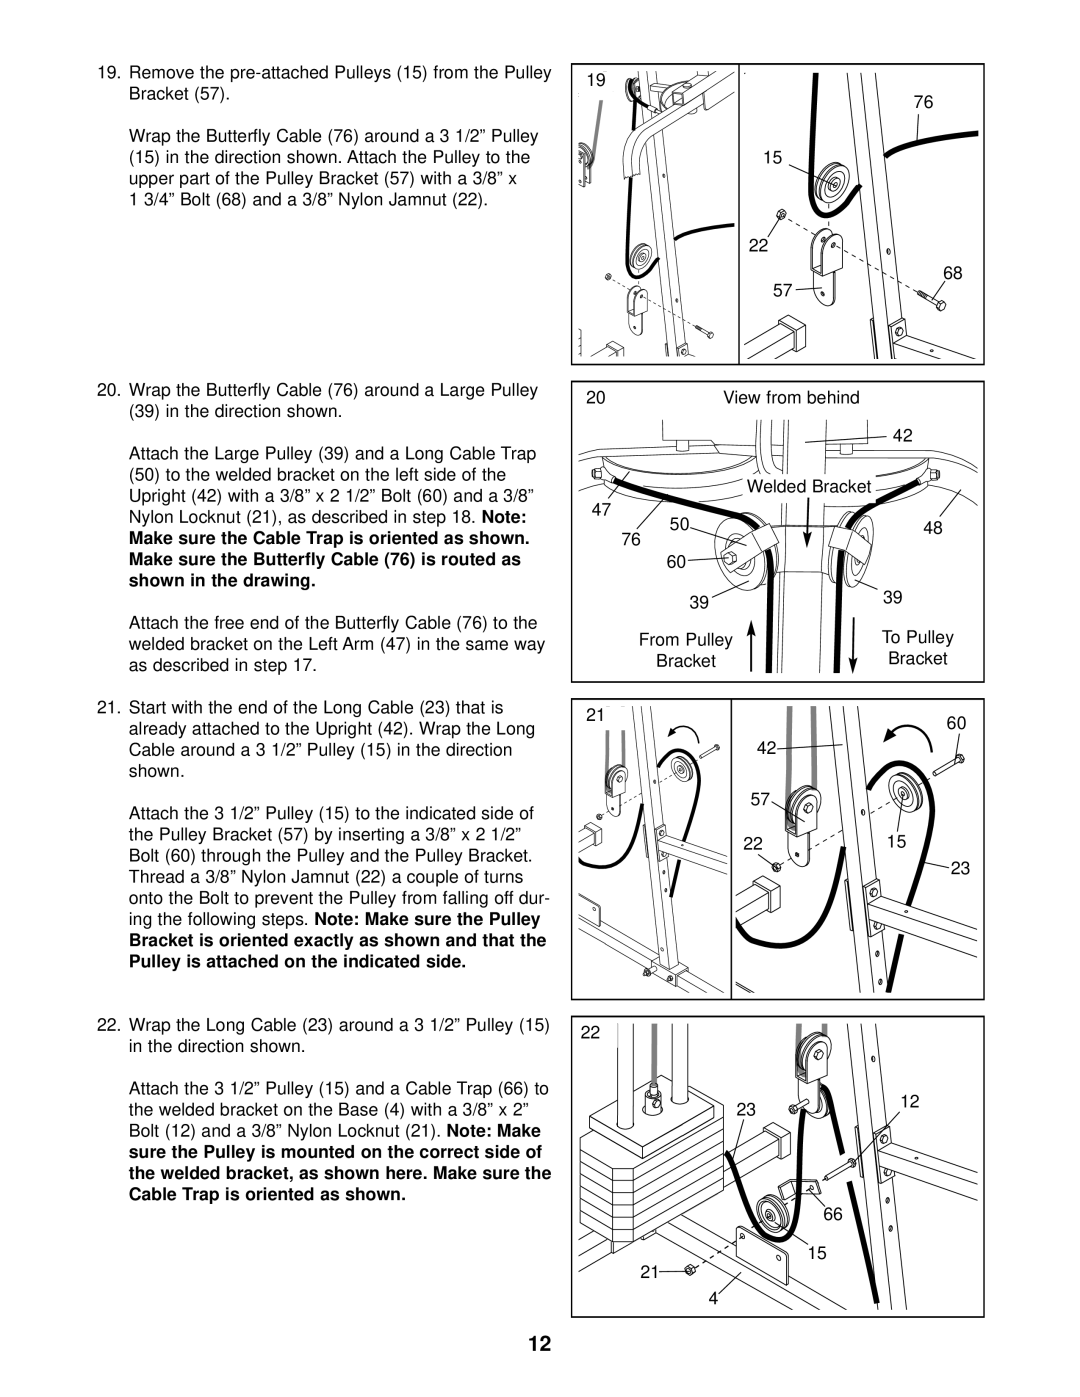 Weider 740 user manual ing the following steps. Note Make sure the Pulley 